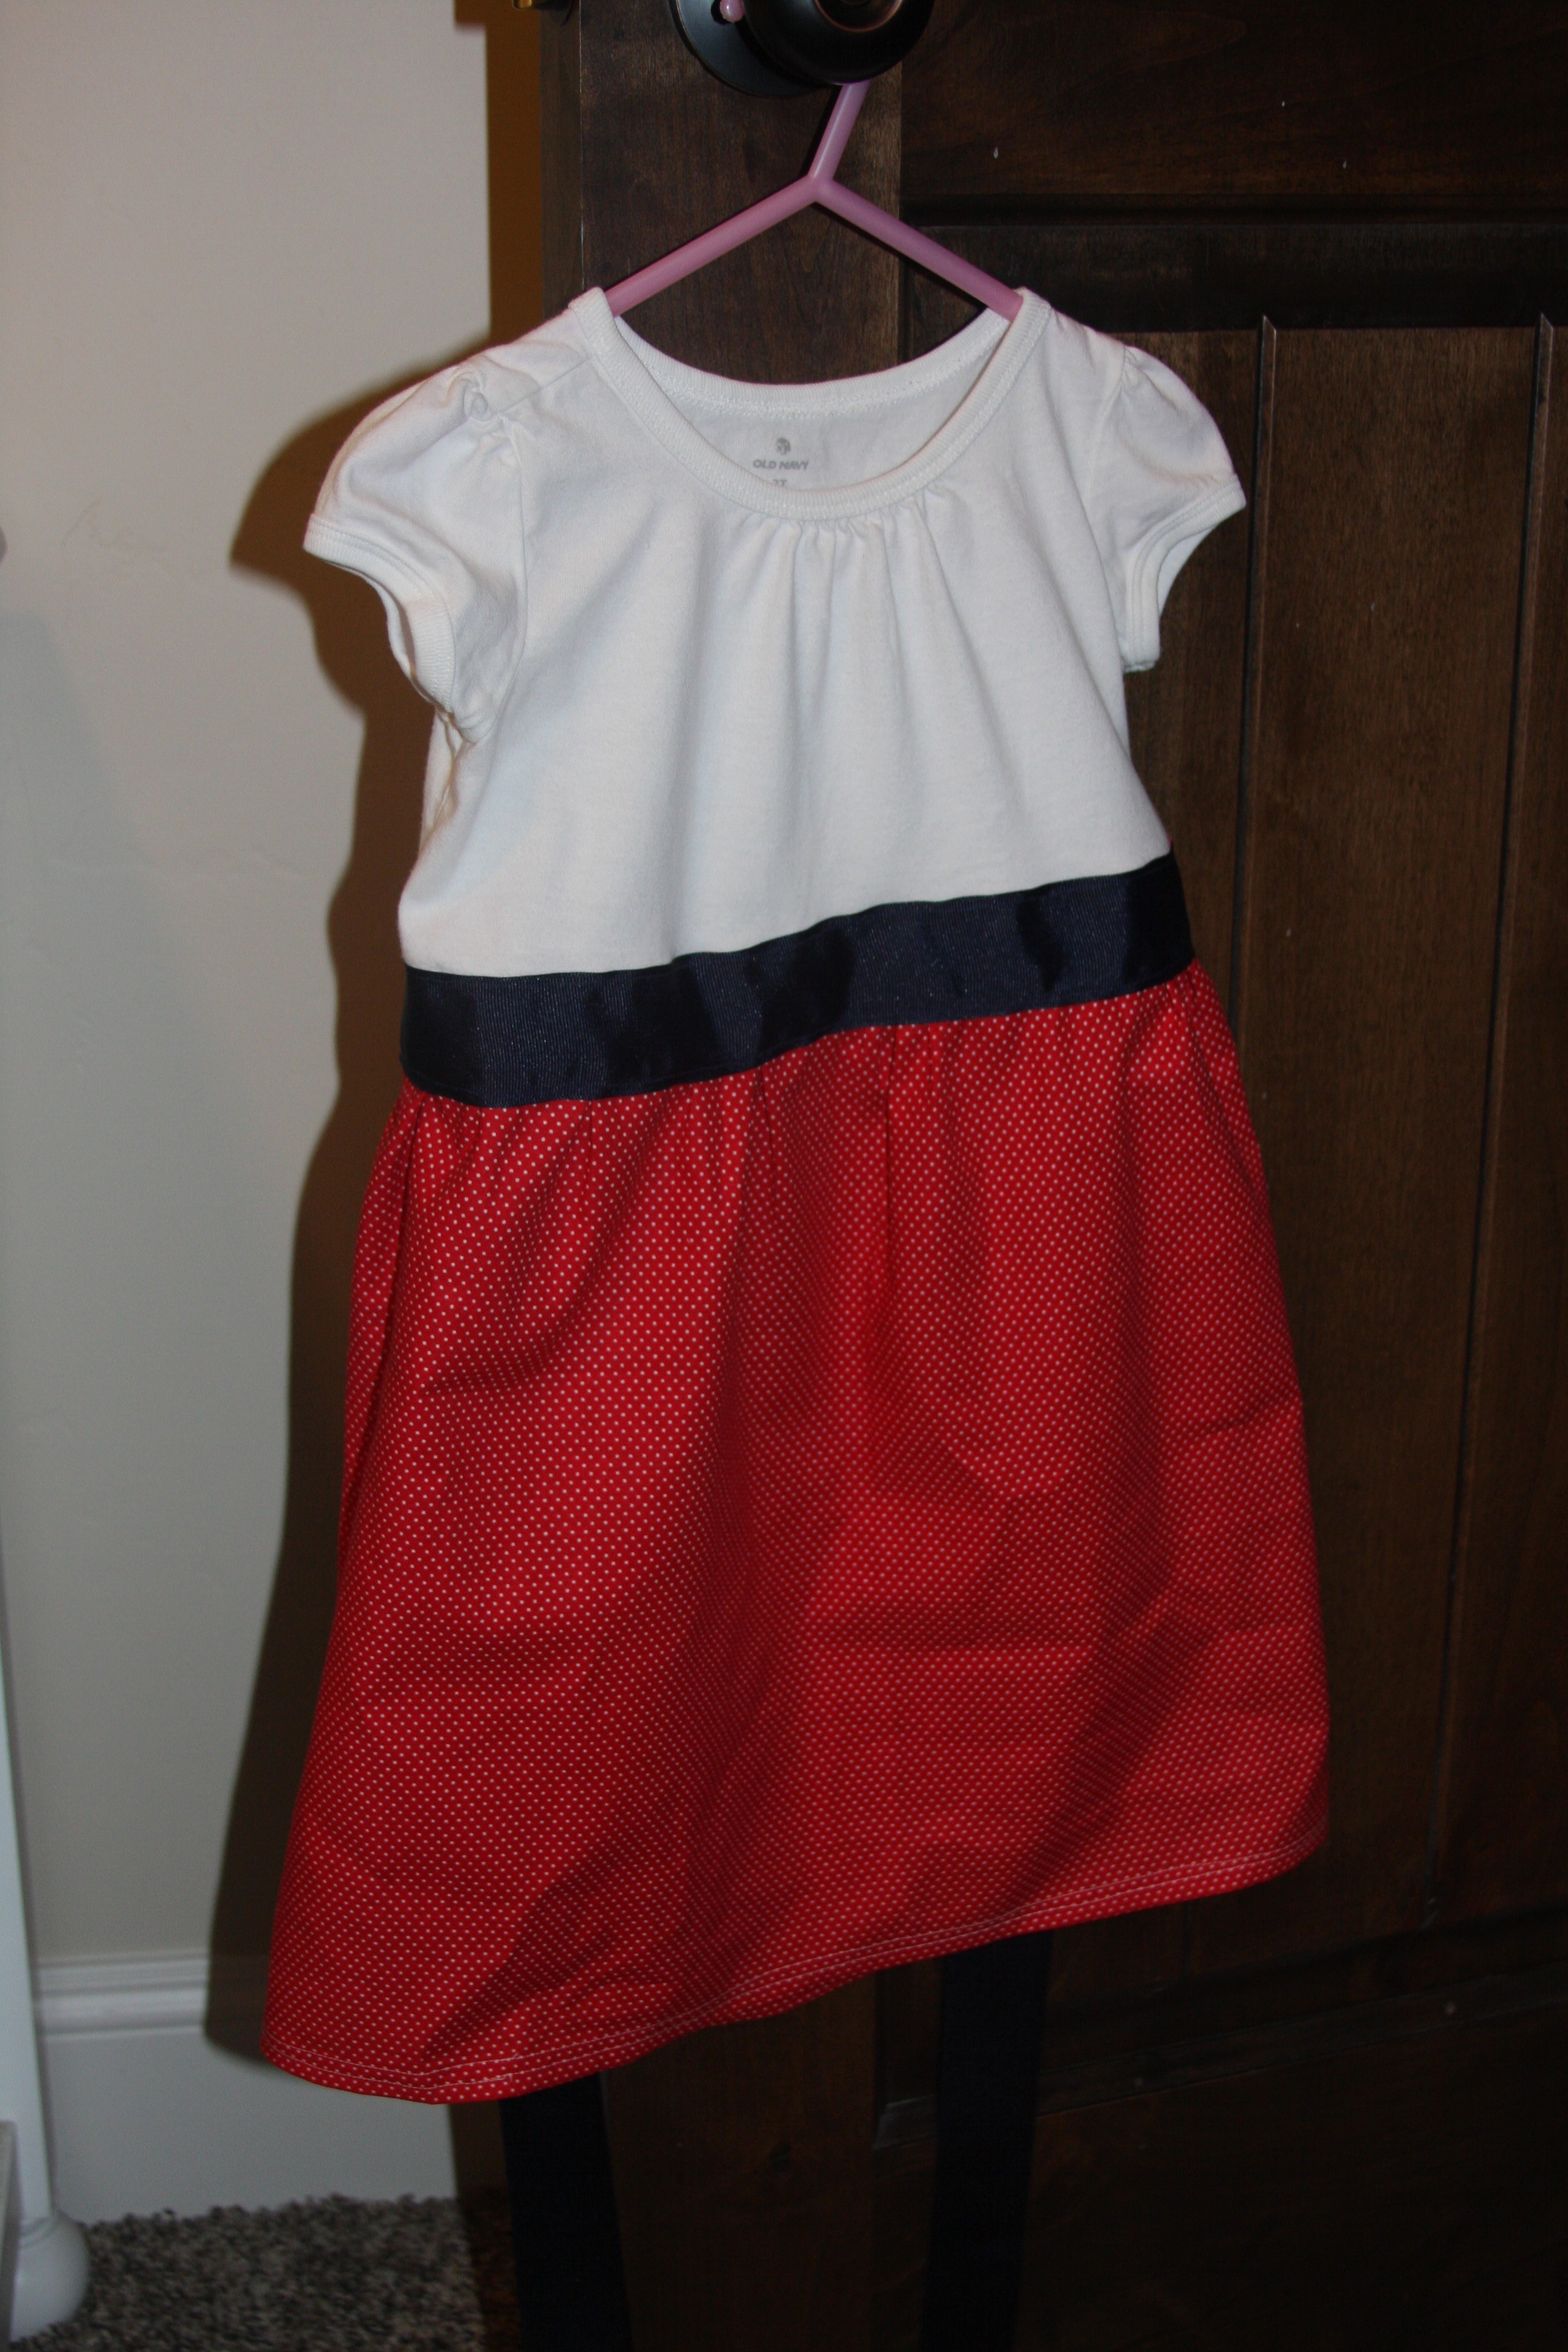 How To: Sew an Easy Toddler Fourth of July Dress